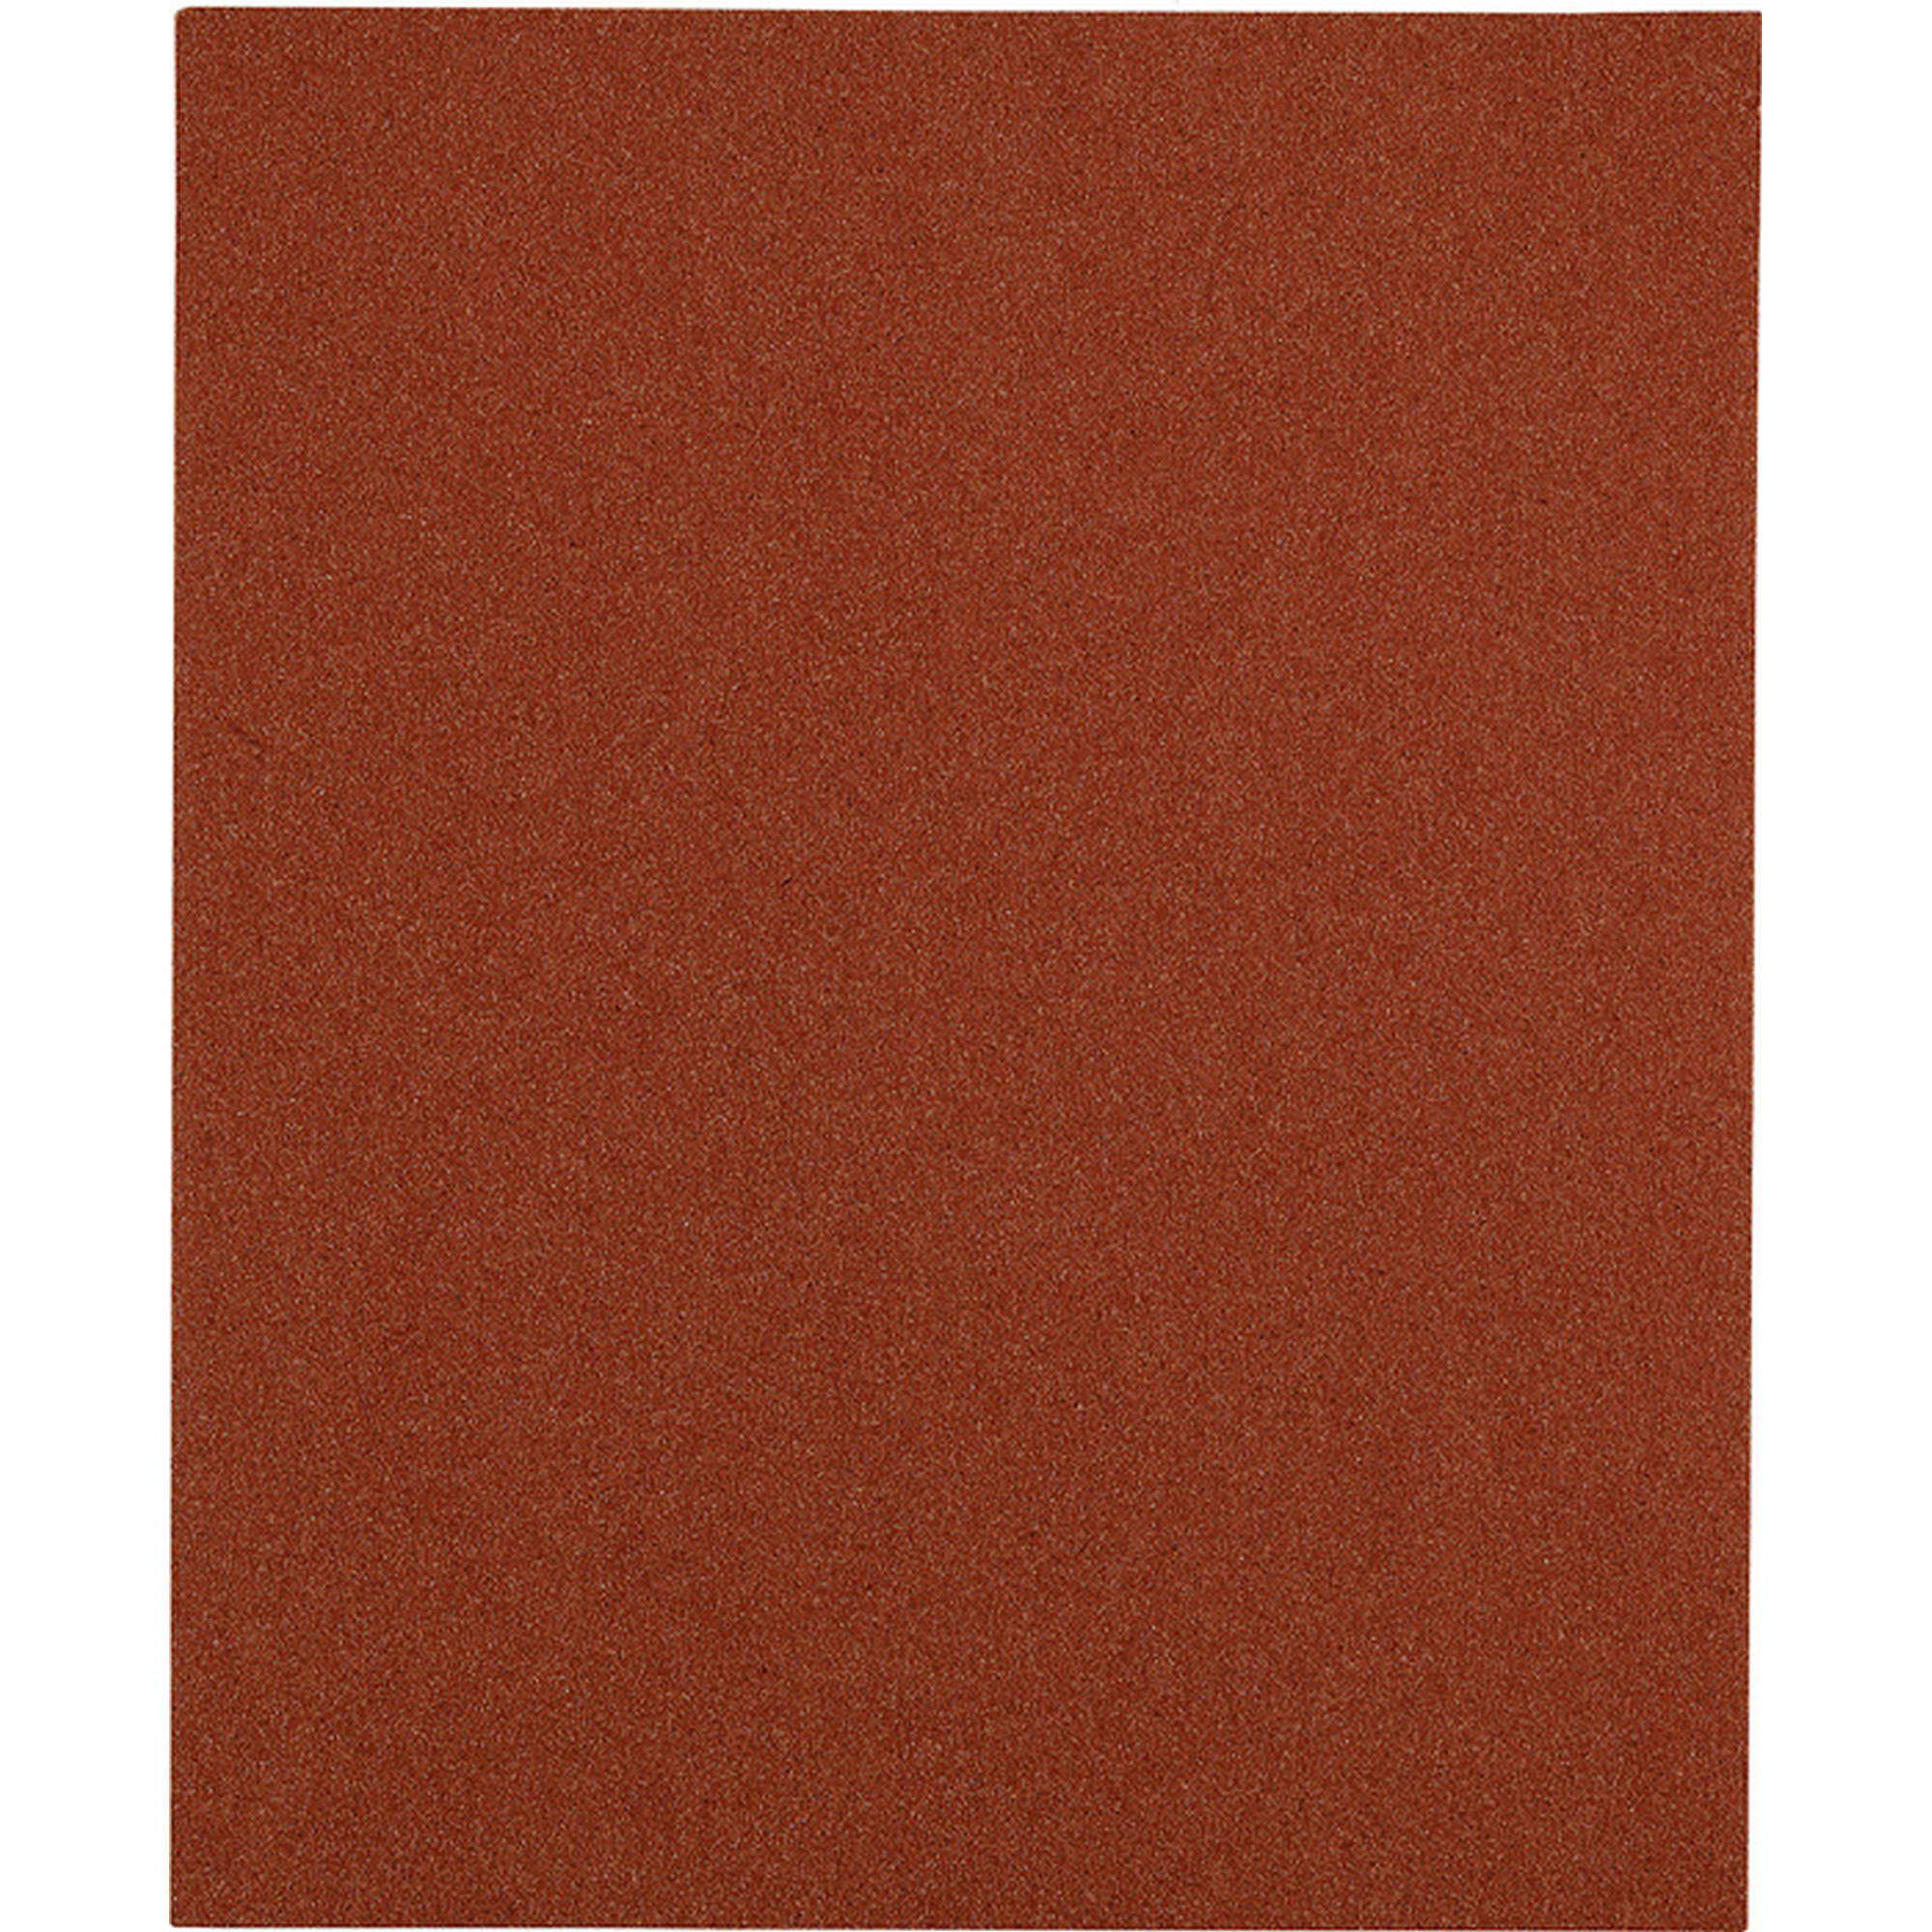 Schleifpapier 'Holz & Farbe' 230 x 280 mm K120 + product picture